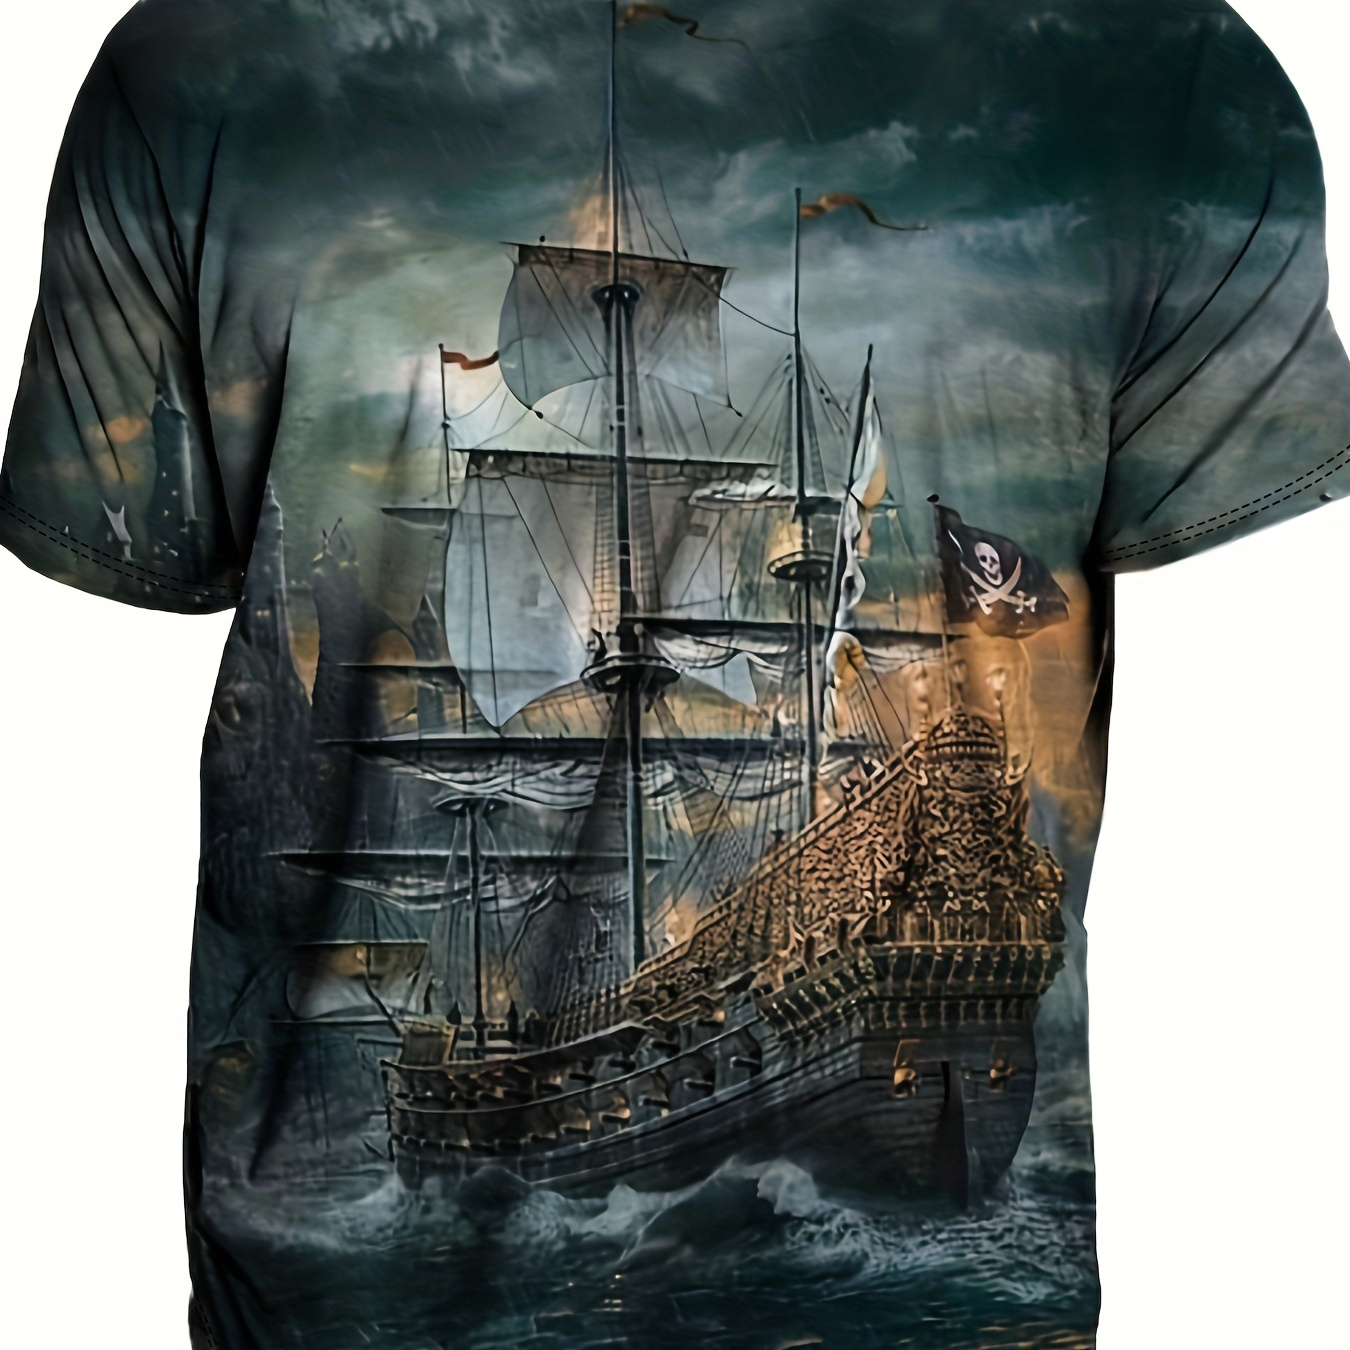 

3d Digital Pirate Ship Pattern Print Men's Graphic T-shirts, Causal Comfy Tees, Short Sleeve Pullover Tops, Men's Summer Outdoor Clothing